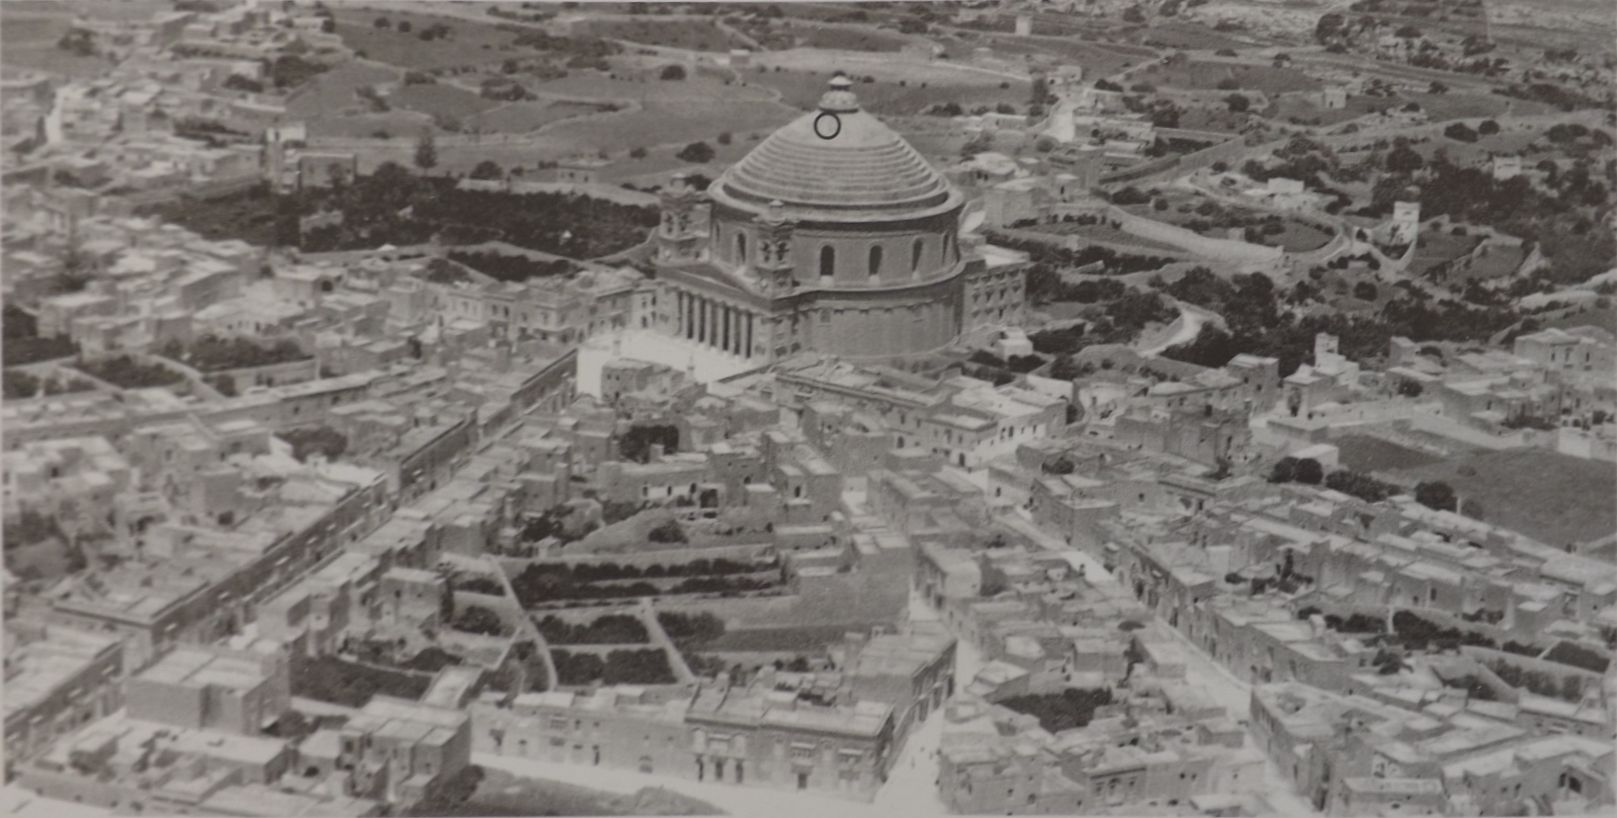 Aerial photo of the Mosta Rotunda in a pre-war photograph with circle marking where the bomb pierced the dome